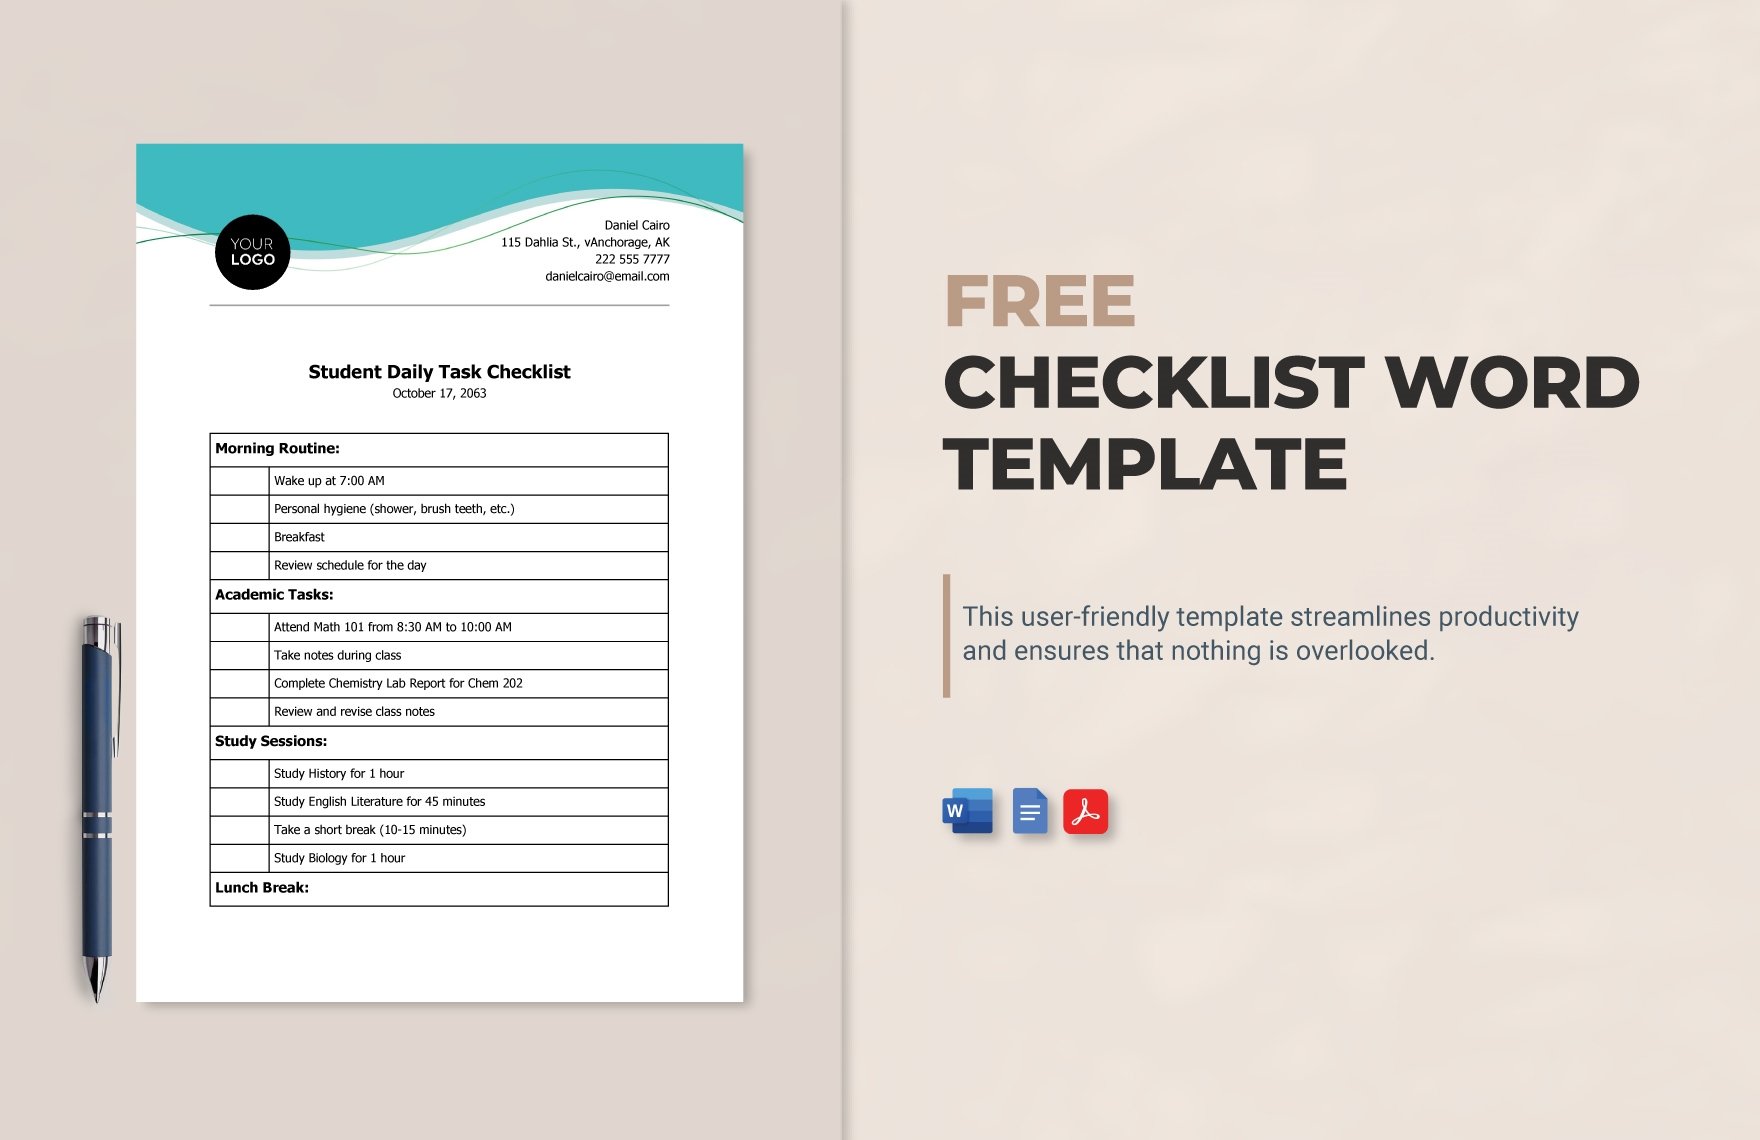 Free Checklist Word Template in Word, Google Docs, PDF